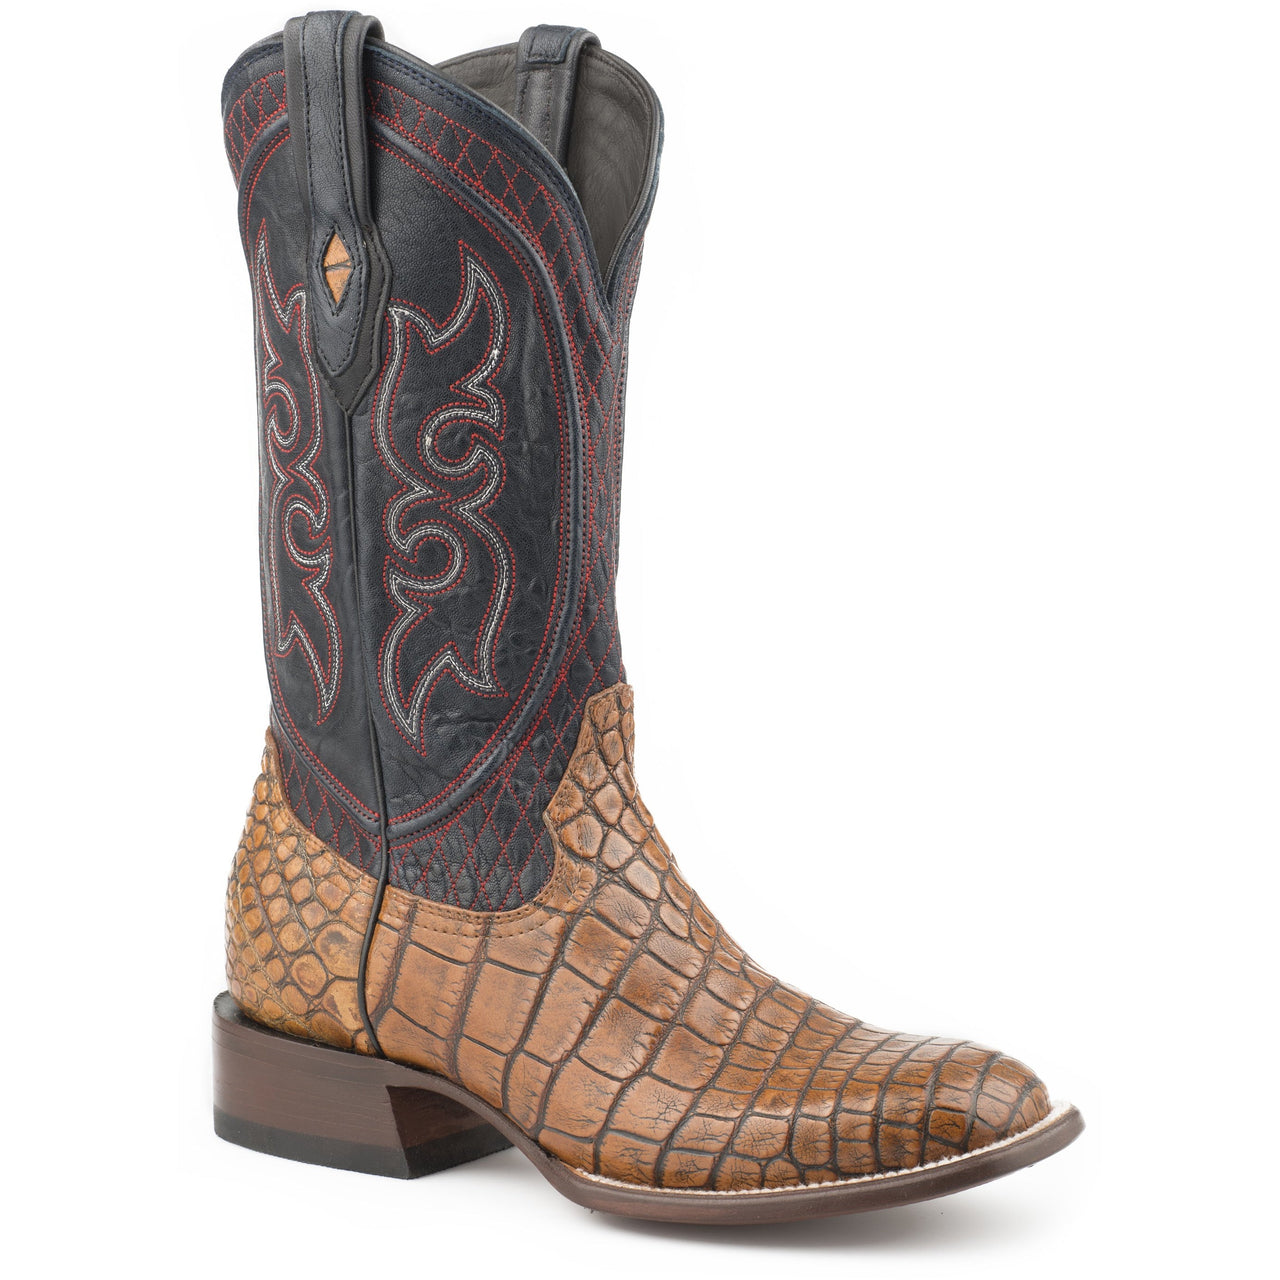 Men's Stetson Roundup Taupe Alligator Boots Handcrafted JBS Collection Honey - yeehawcowboy